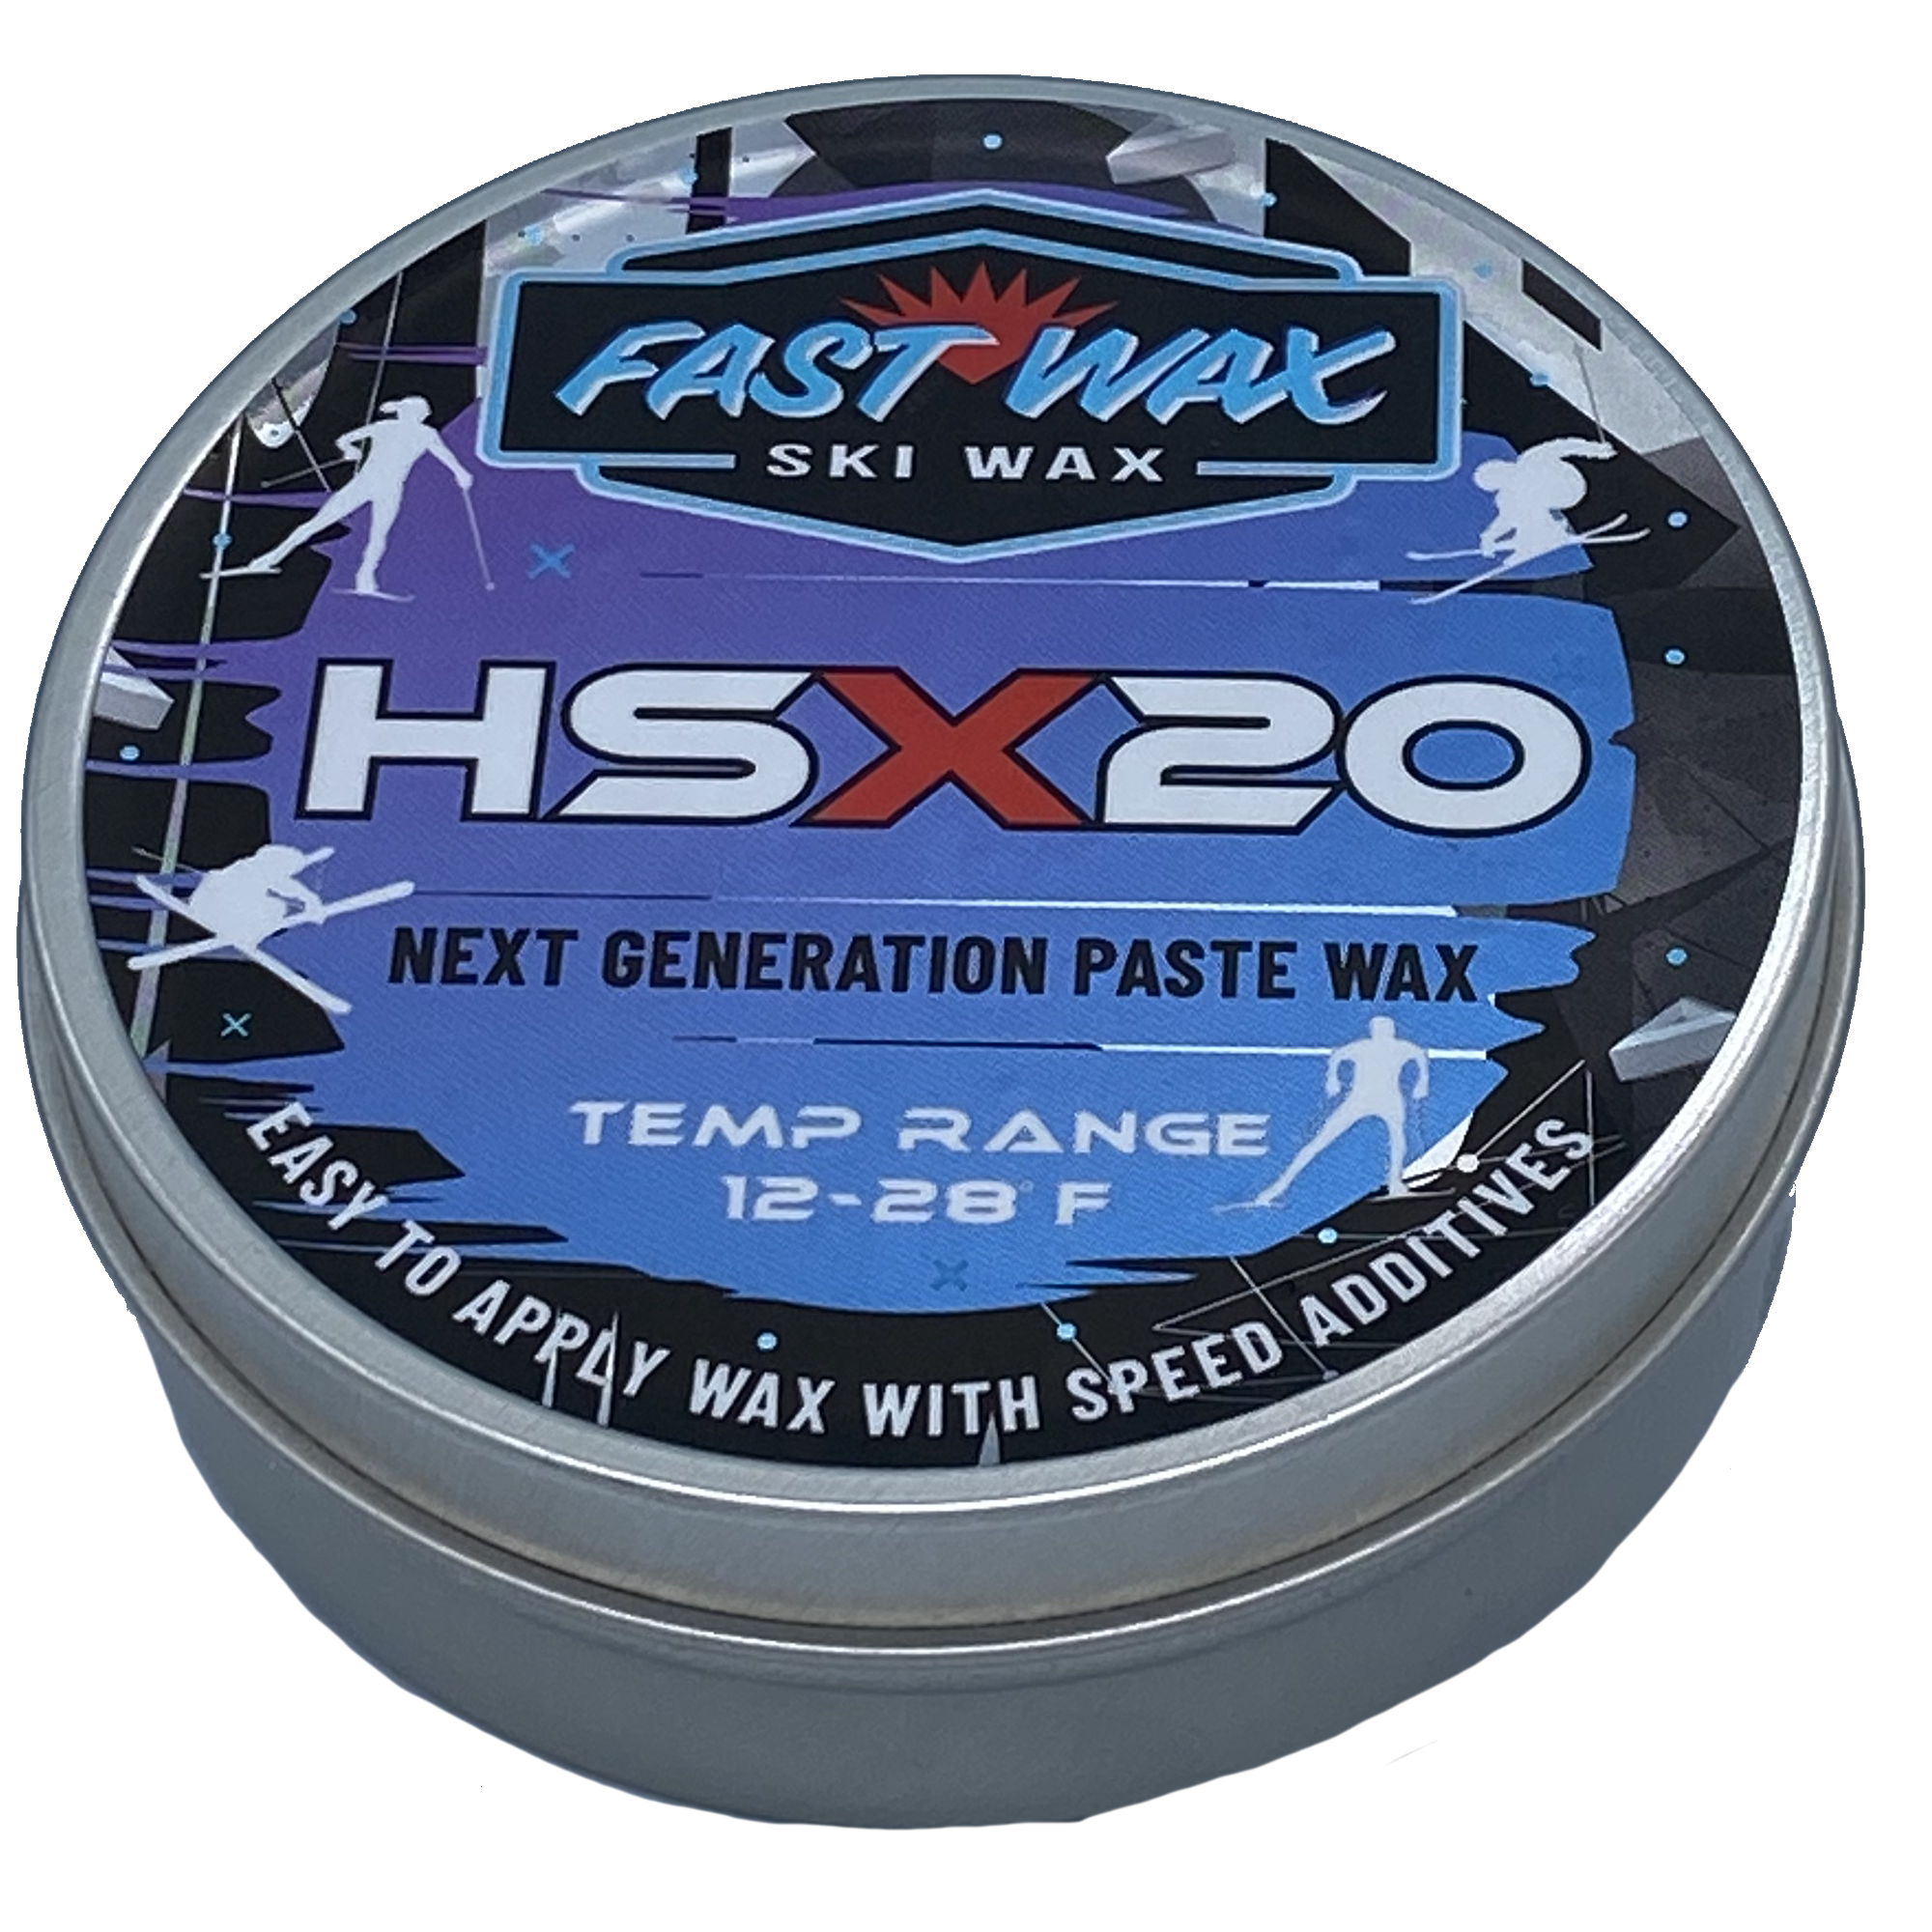 Fast Wax HSX 10,20,30 Paste Wax 60g, Buy all and SAVE! - Ski Shop